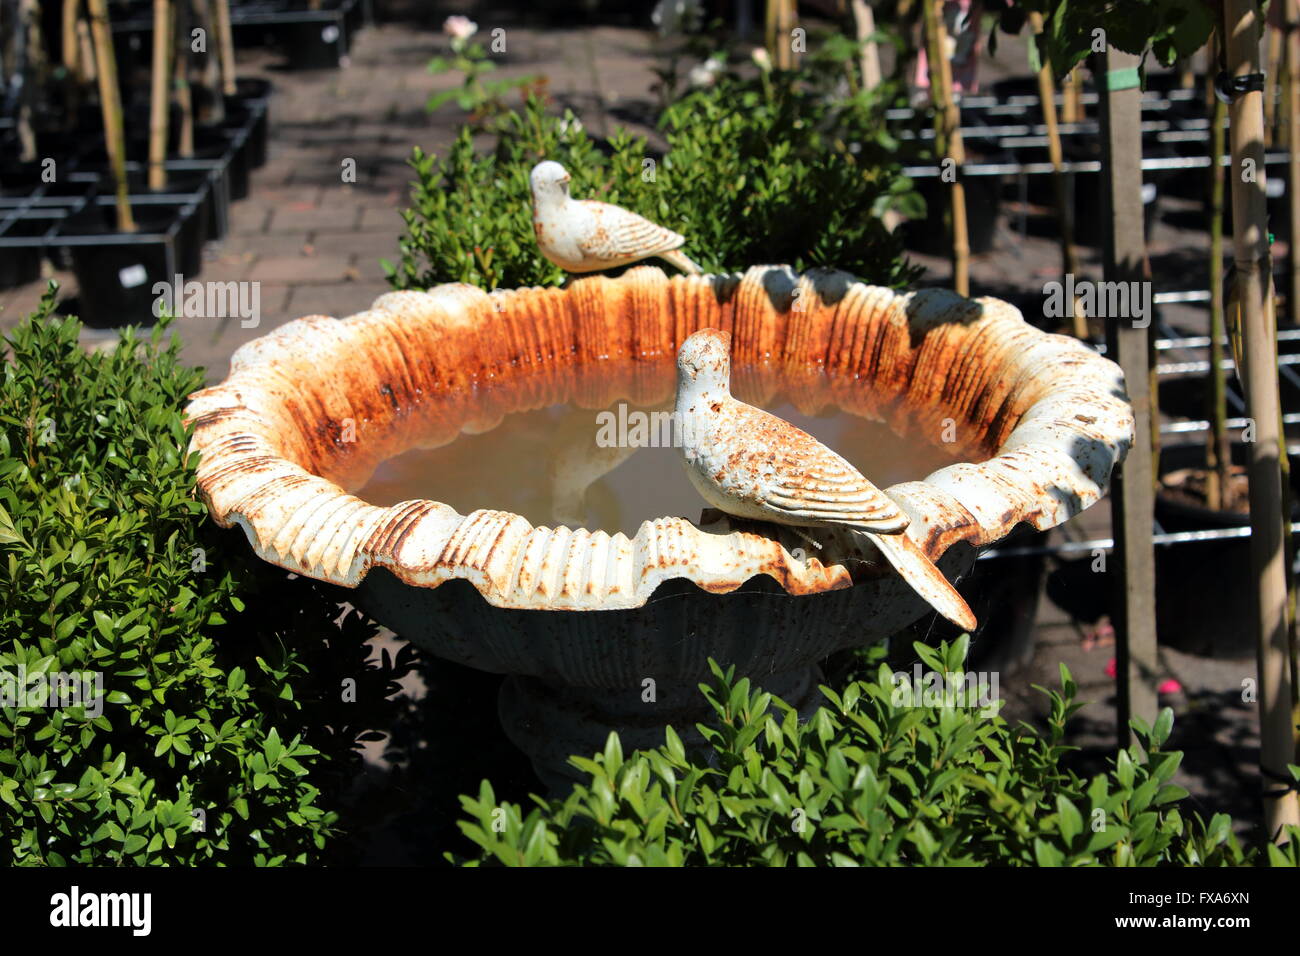 Rustic bird bath, one commonly garden feature uses in a garden Stock Photo